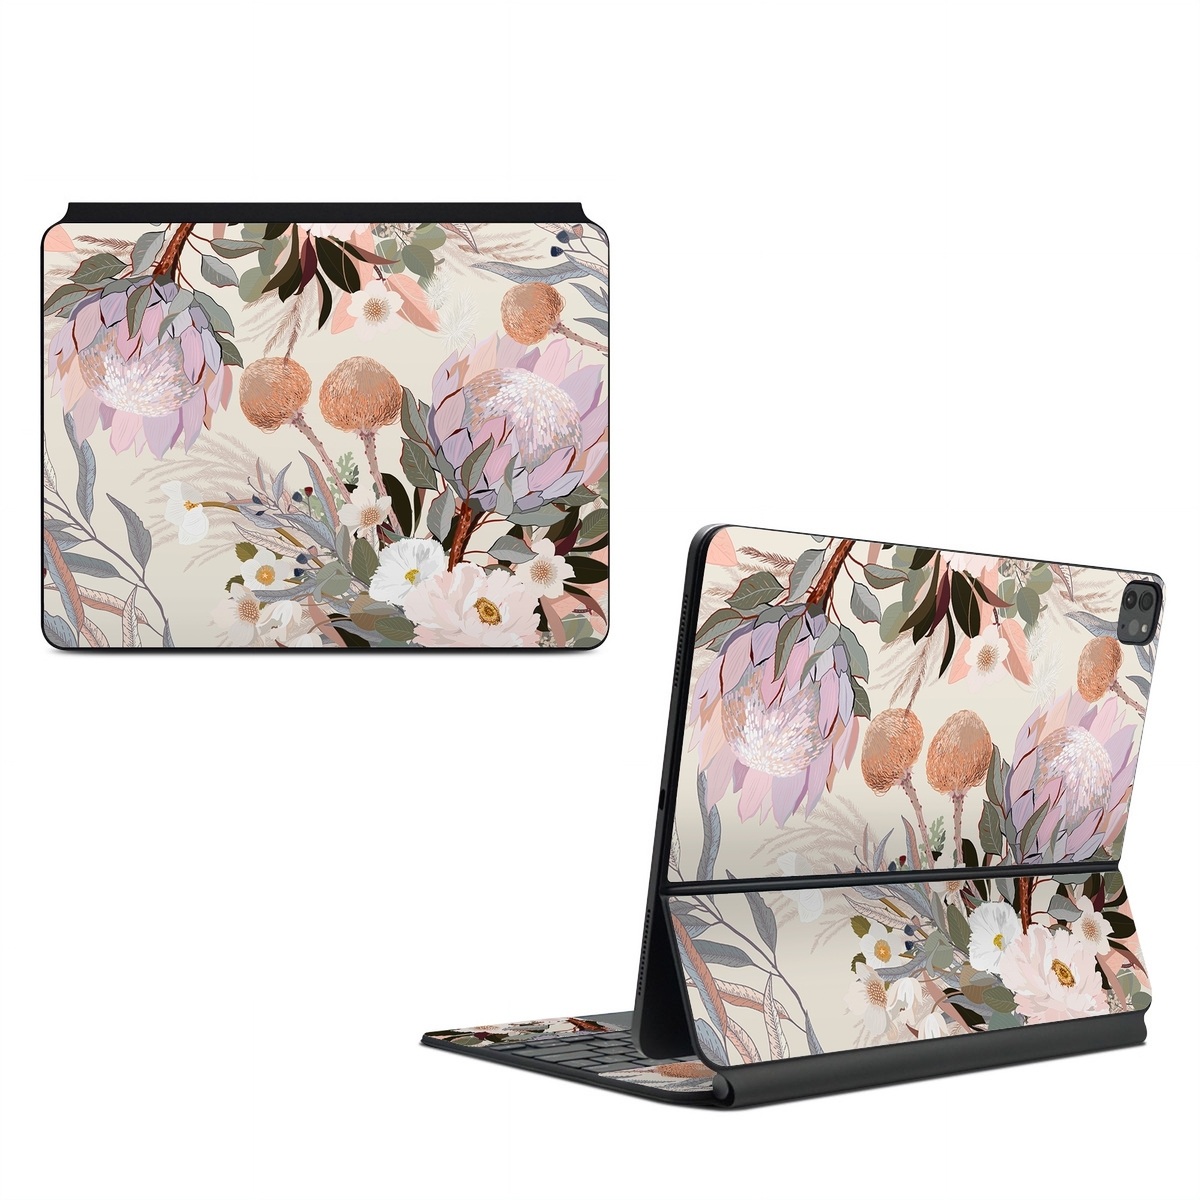 Magic Keyboard for iPad Series Skin design of Flower, Floral design, Watercolor paint, Plant, Spring, Branch, Flower Arranging, Lilac, Floristry, Petal, with pink, purple, green, brown, white, yellow, black colors